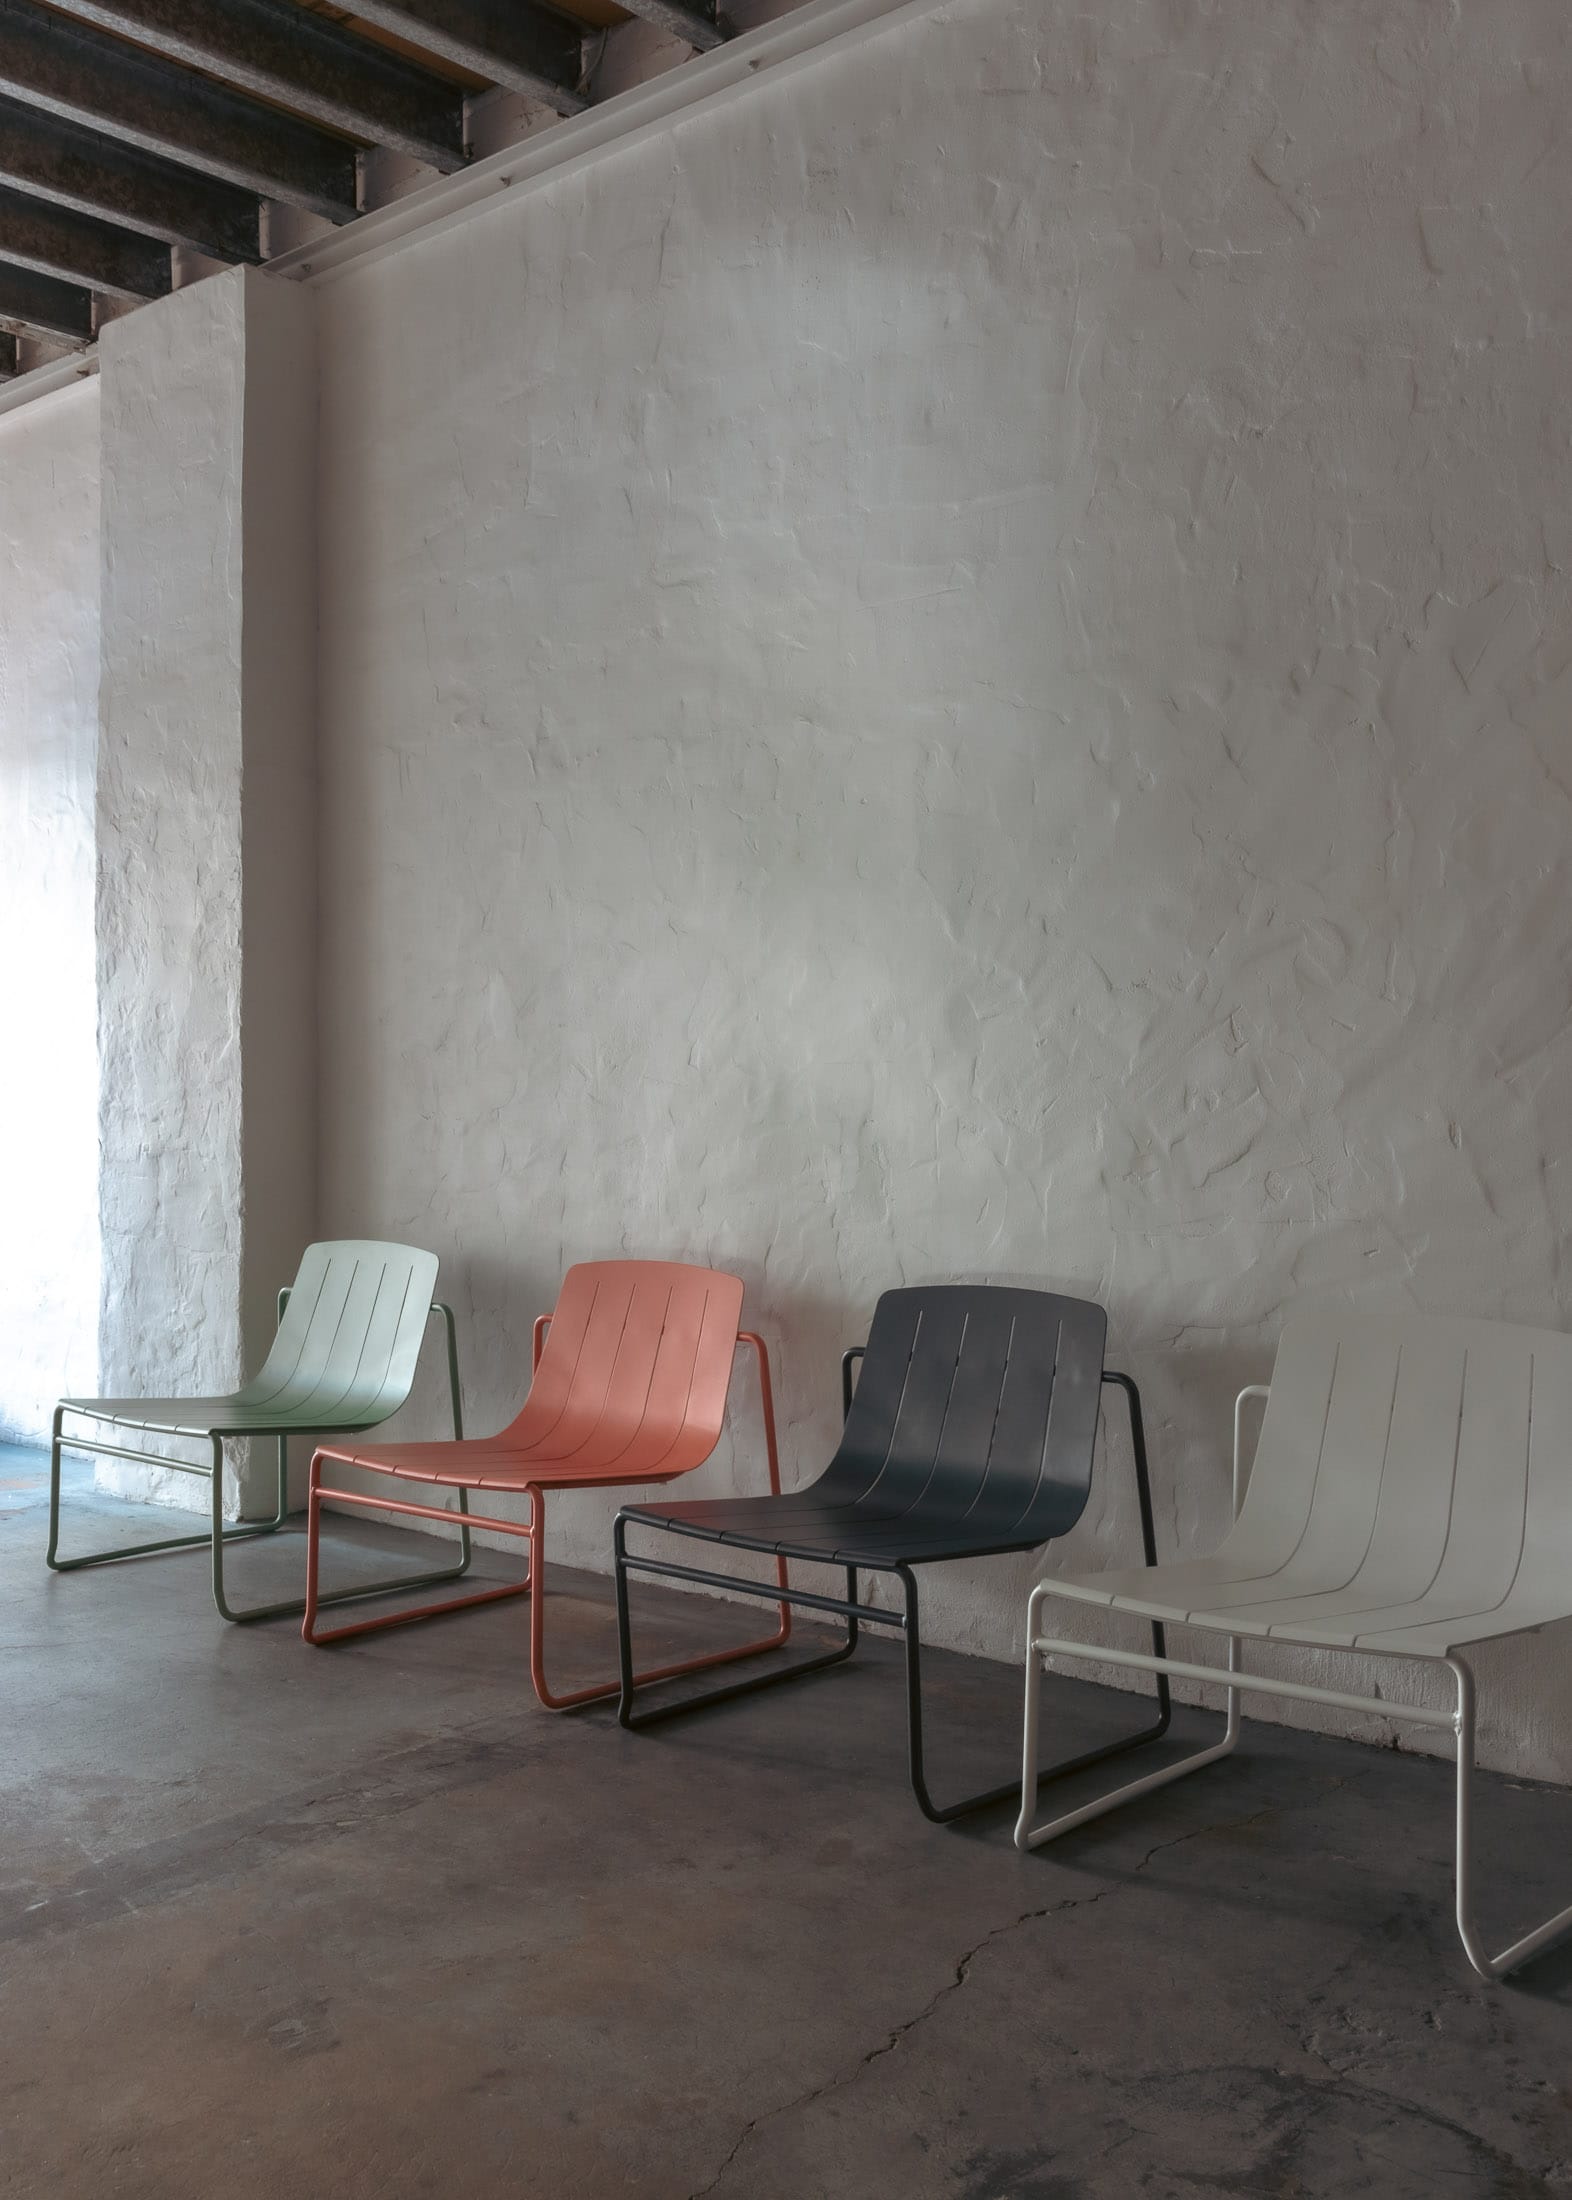 Franka's Frankie Outdoor Lounge Chairs.Four unique outdoor lounge chairs presented in a row against a textured white wall. Each chair features a different color - mint green, coral, grey, and white - and rests on slender, rounded metal frames.